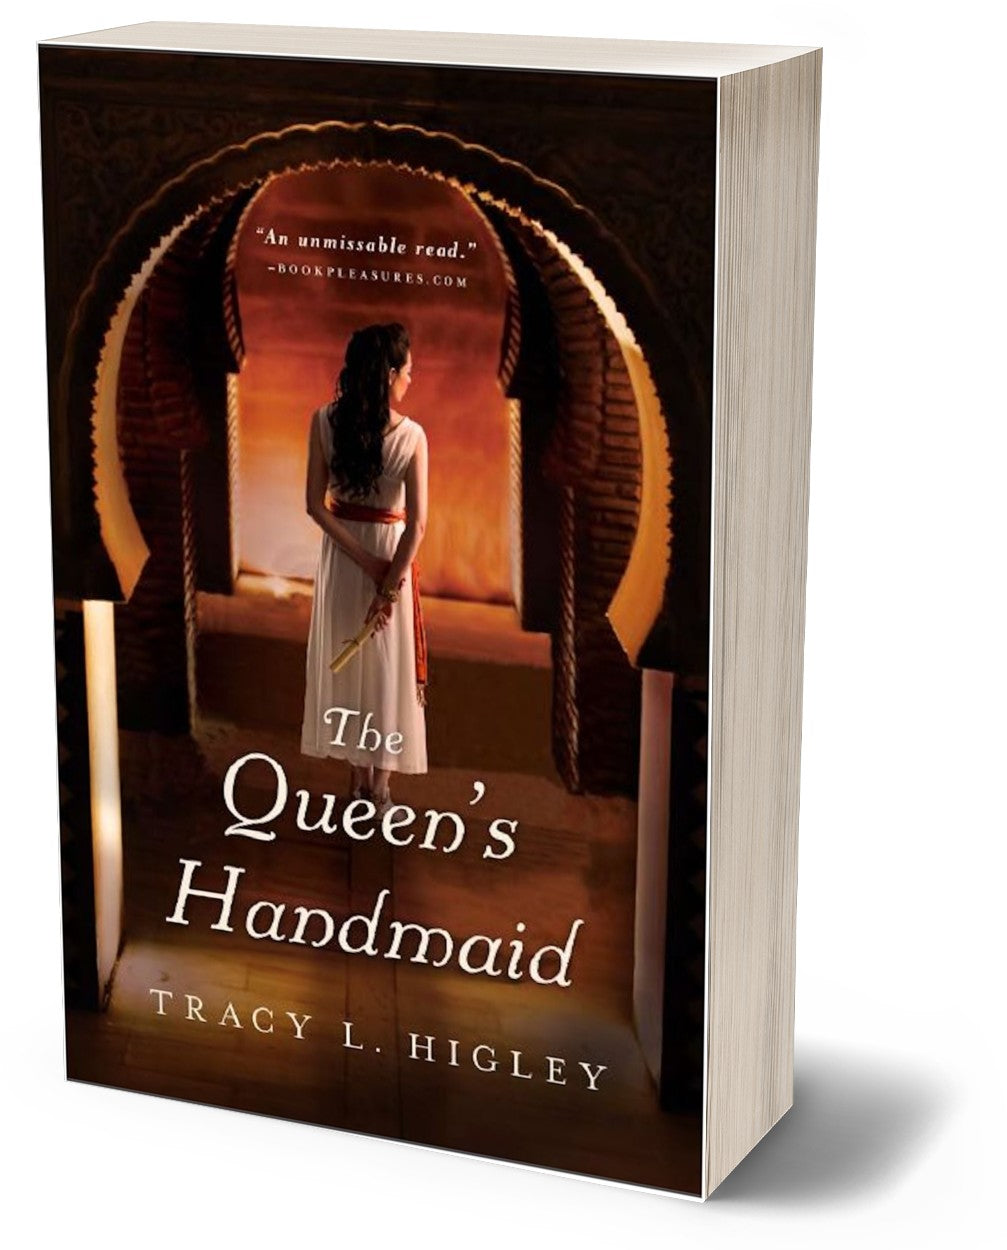 The Queen's Handmaid (paperback, previous cover)